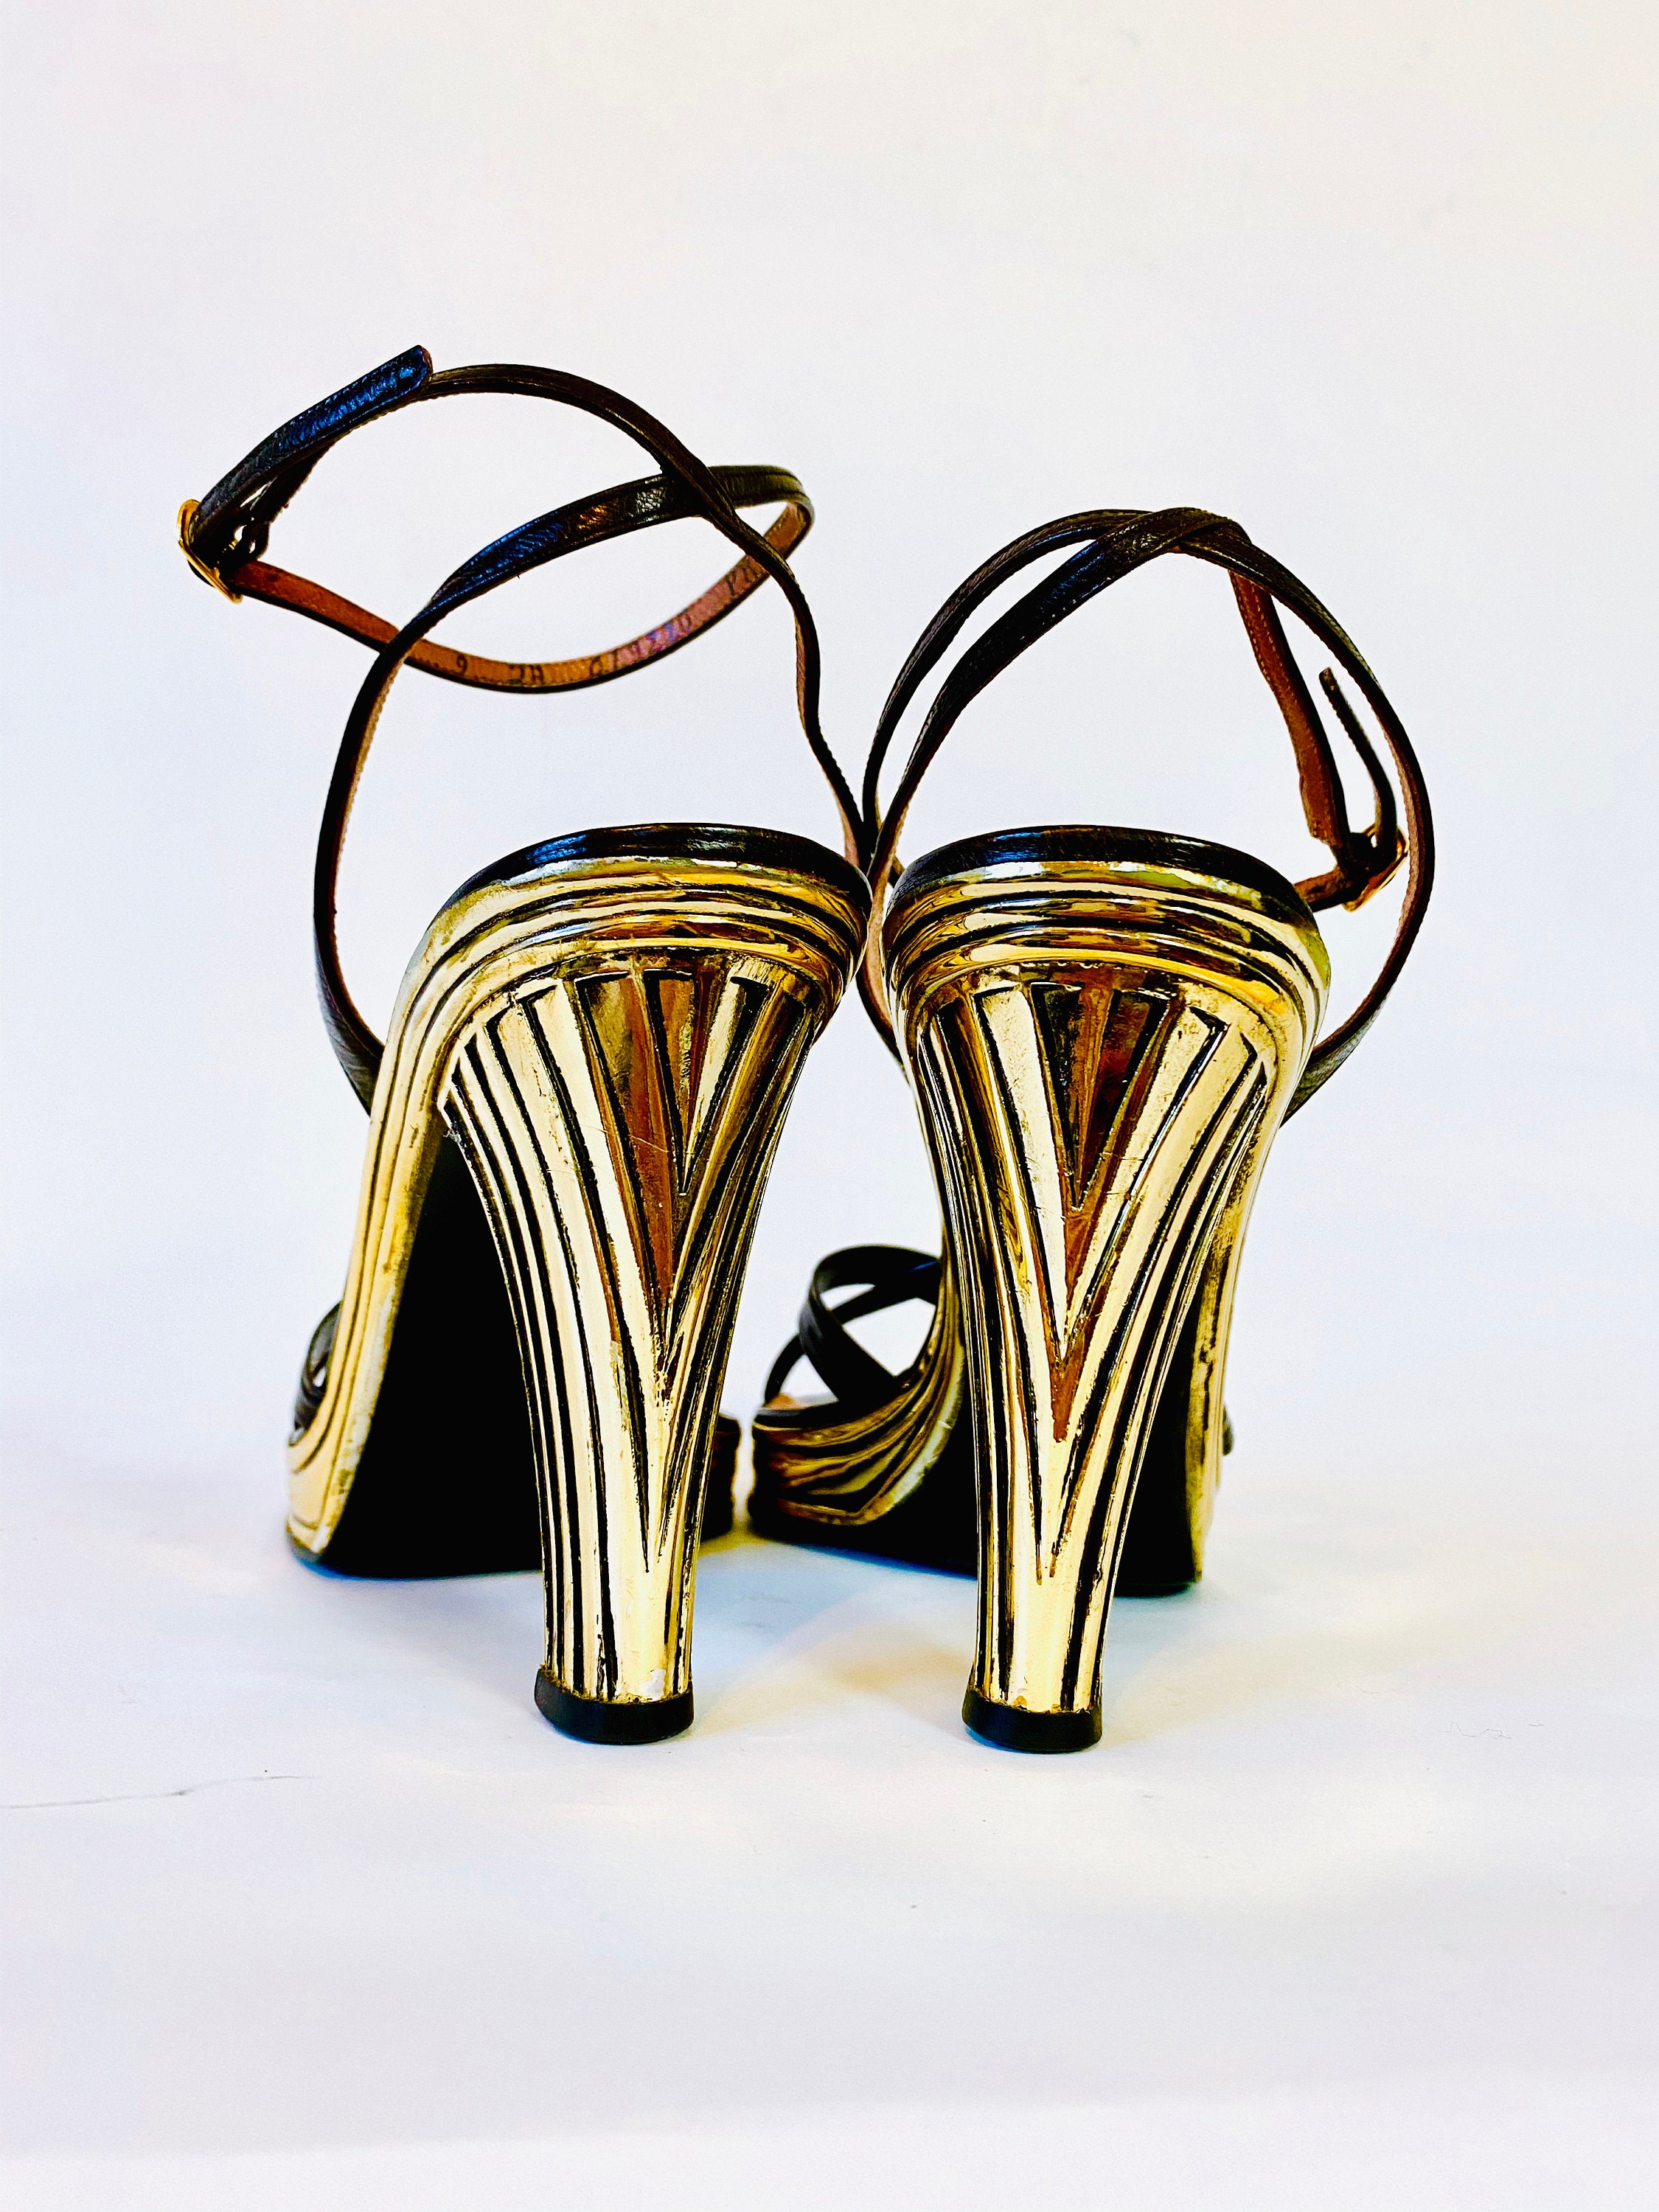 Gold Heels Are a Wise Investment—They Go With Everything | Who What Wear